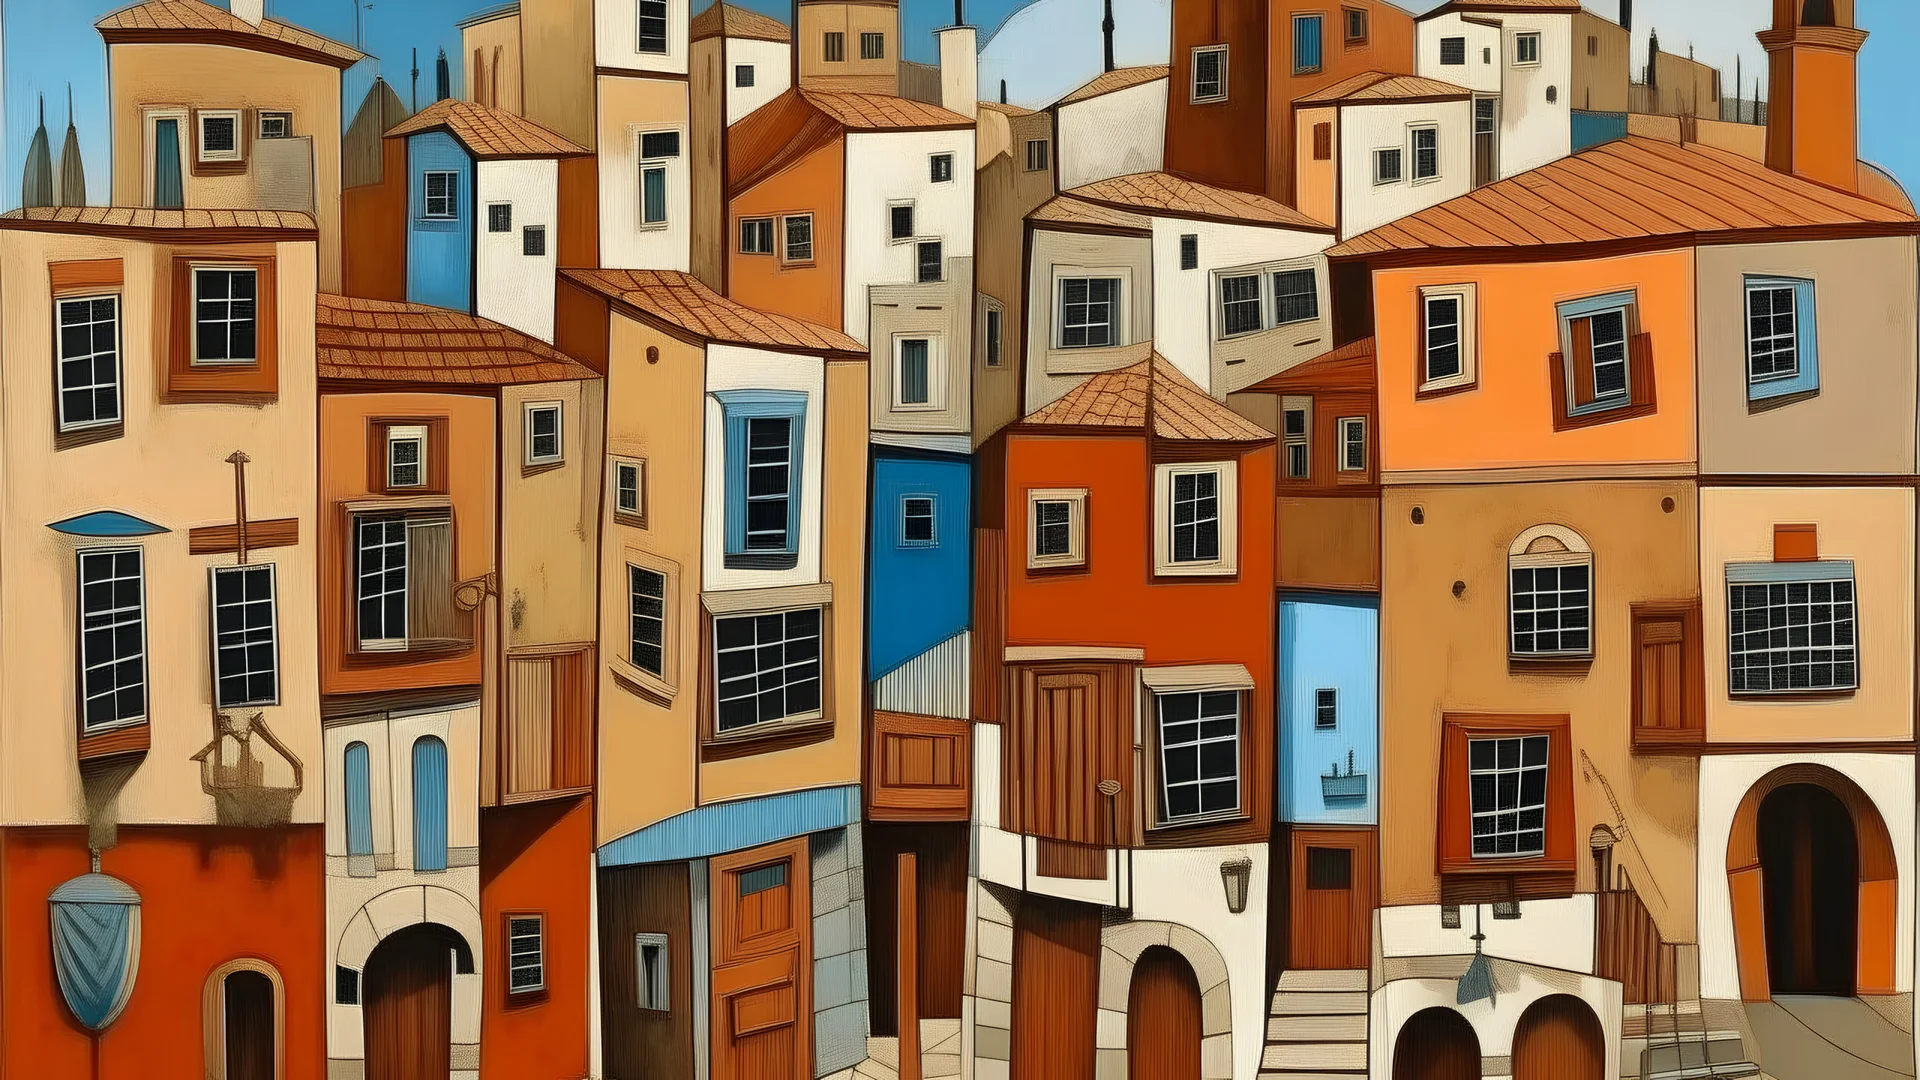 A brown town with buildings made out of instruments painted by Pablo Picasso